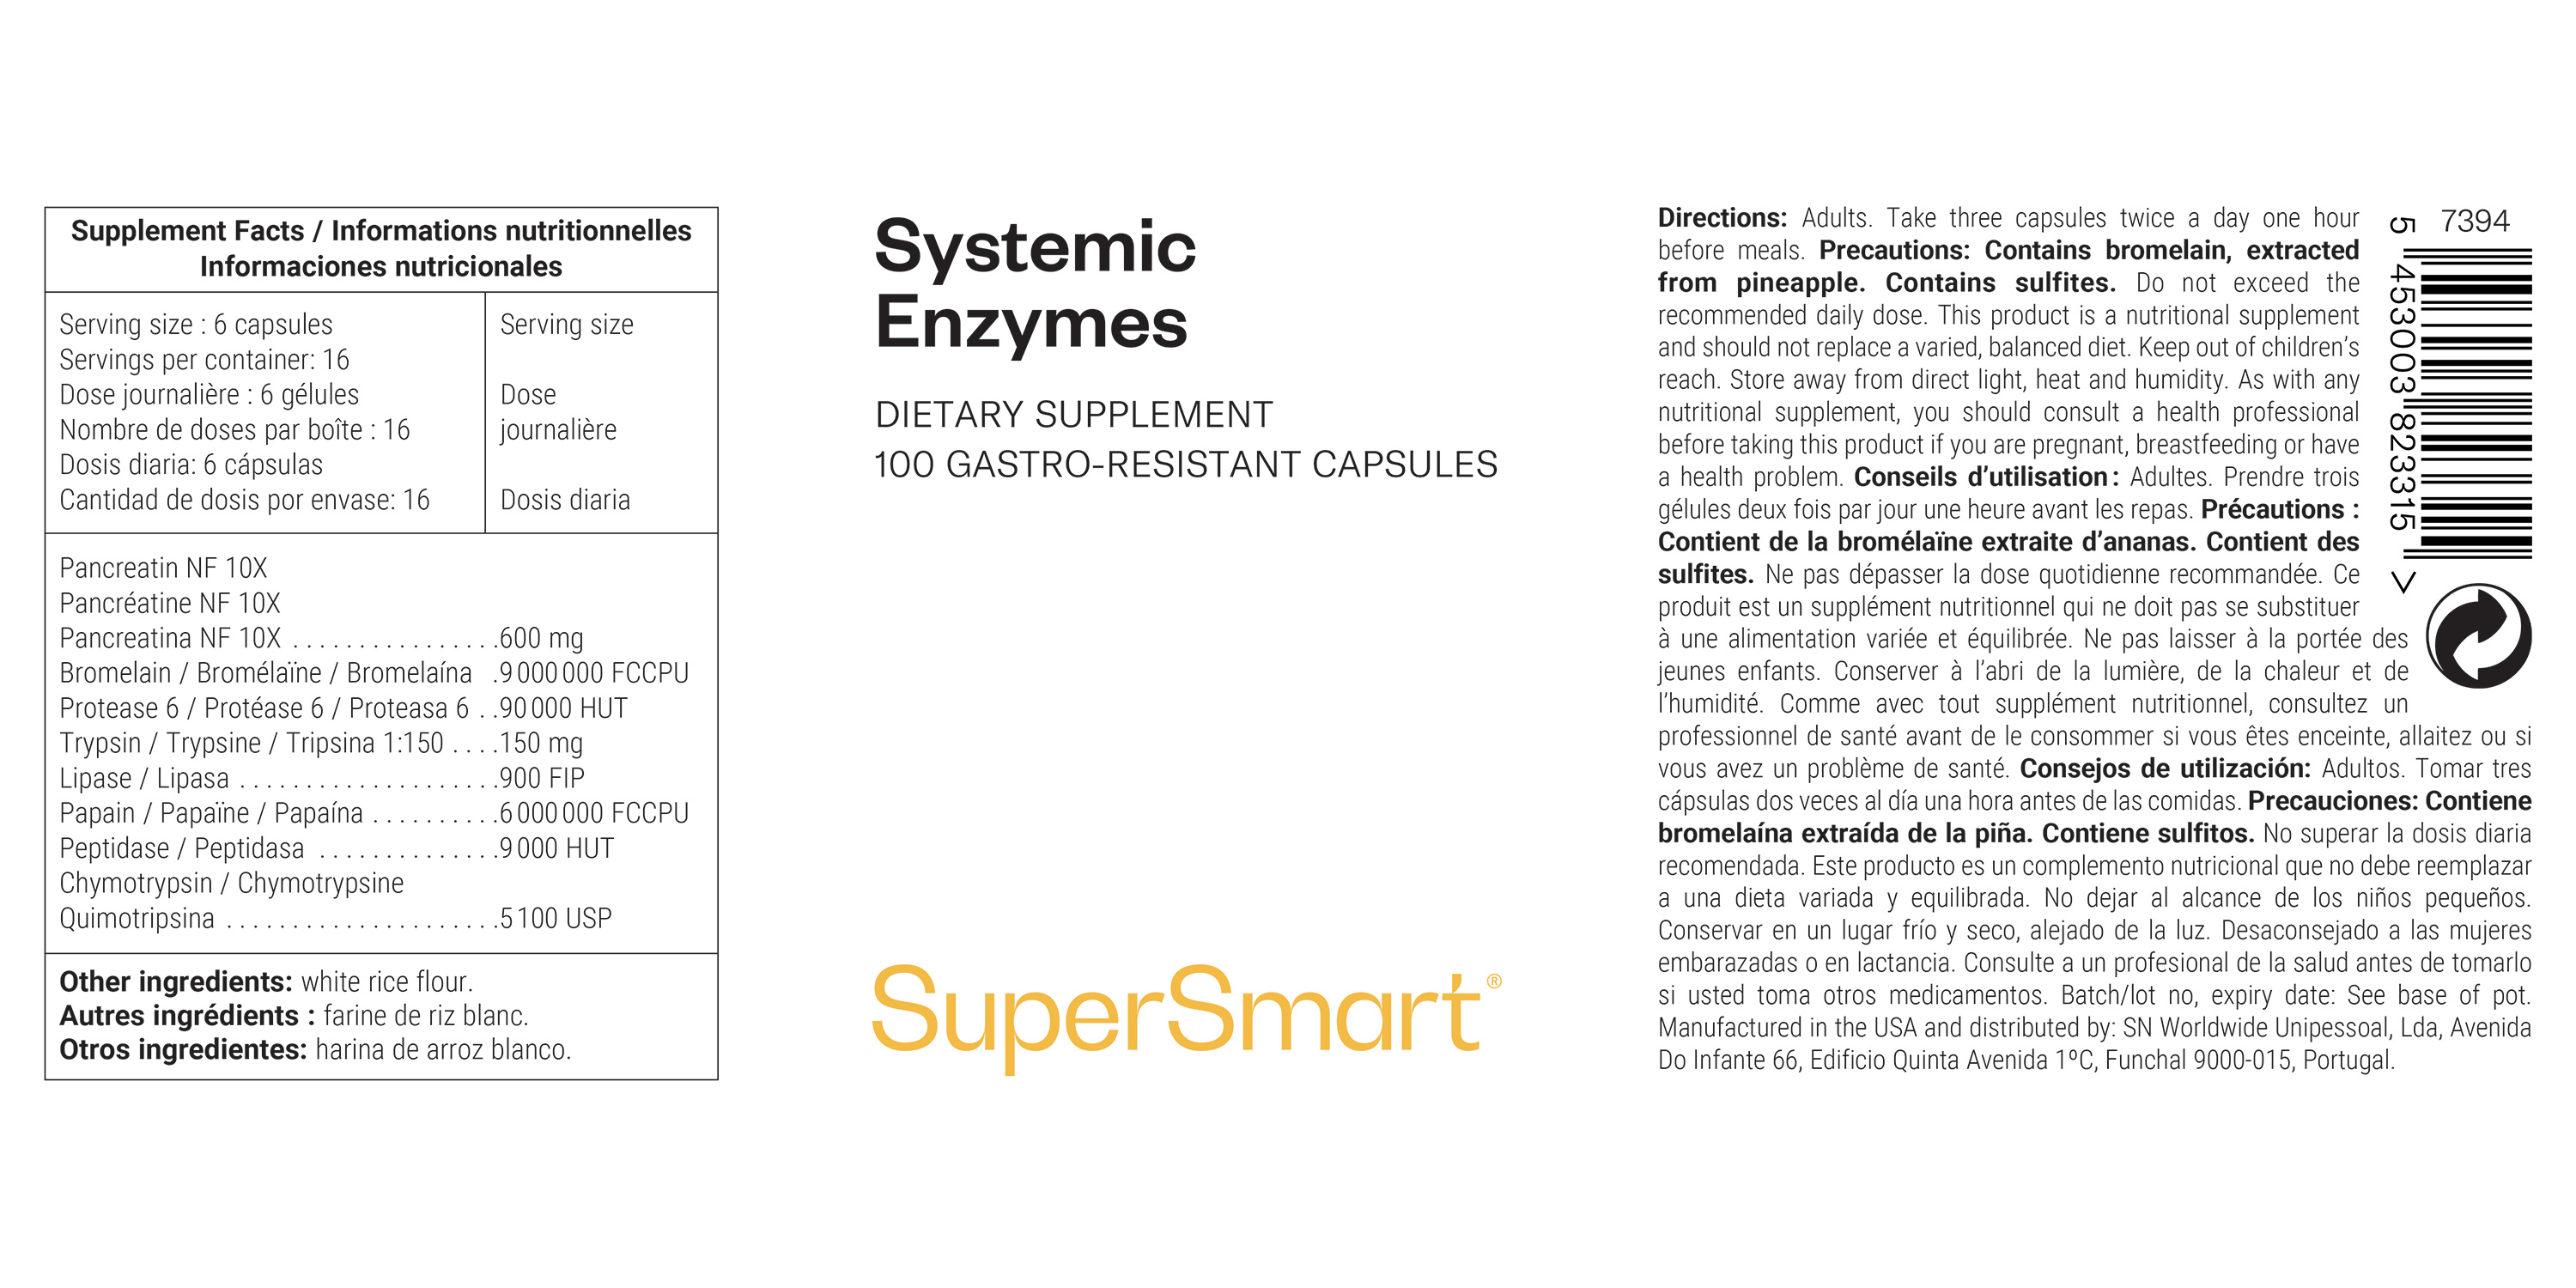 Integratore alimentare Systemic Enzymes